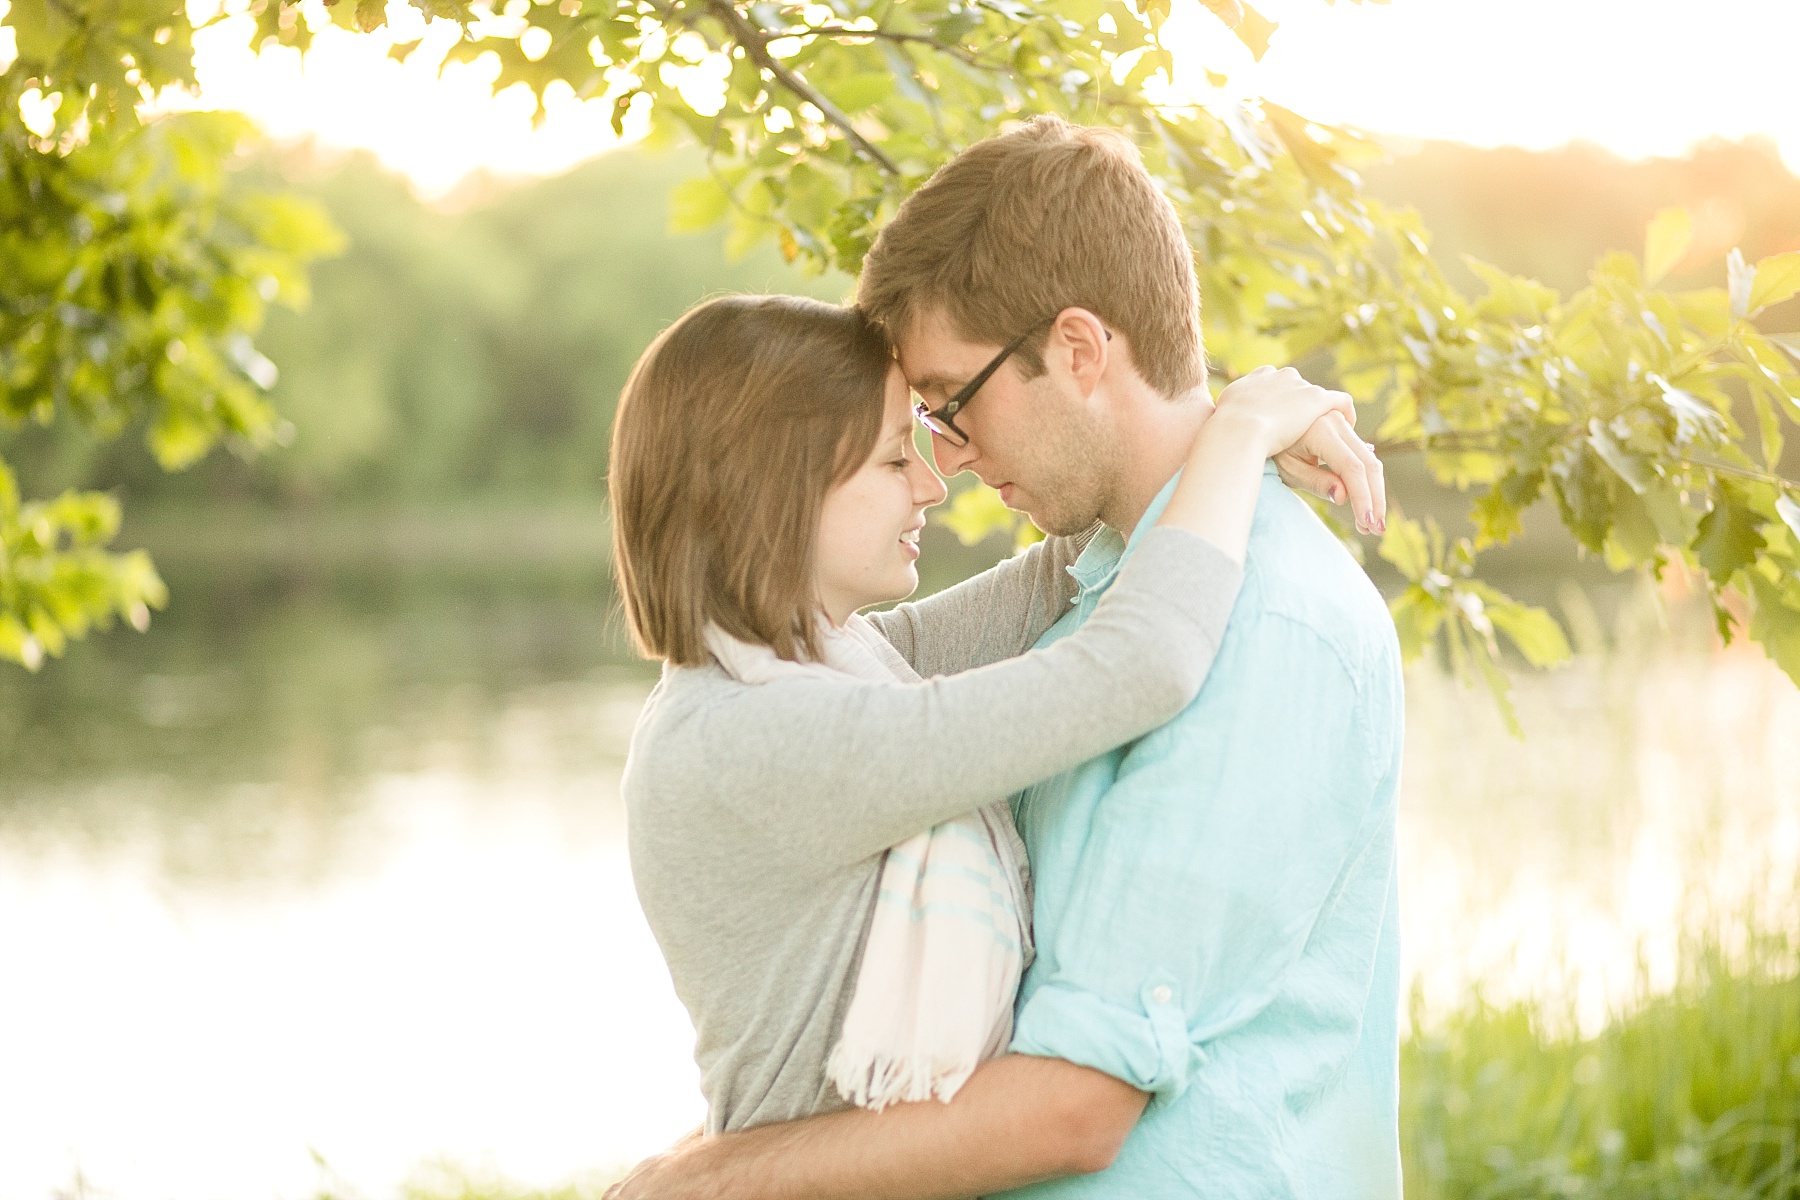 Bailey proposed to Jenna under the stars just steps away from where they first met at UW-Eau Claire at Putnam Park.